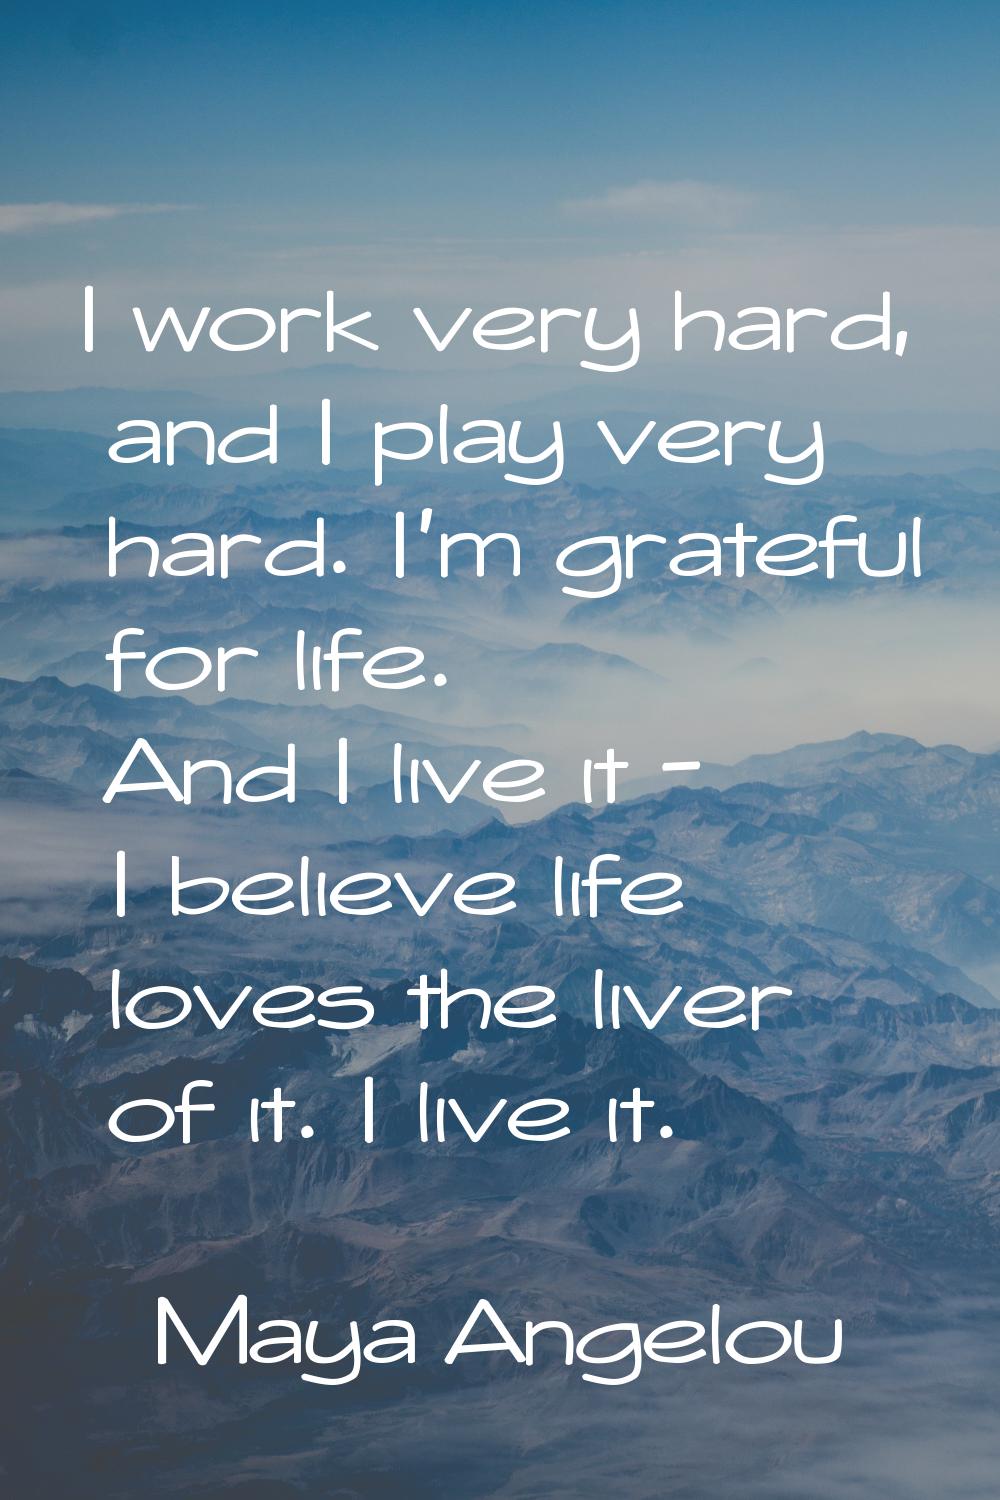 I work very hard, and I play very hard. I'm grateful for life. And I live it - I believe life loves